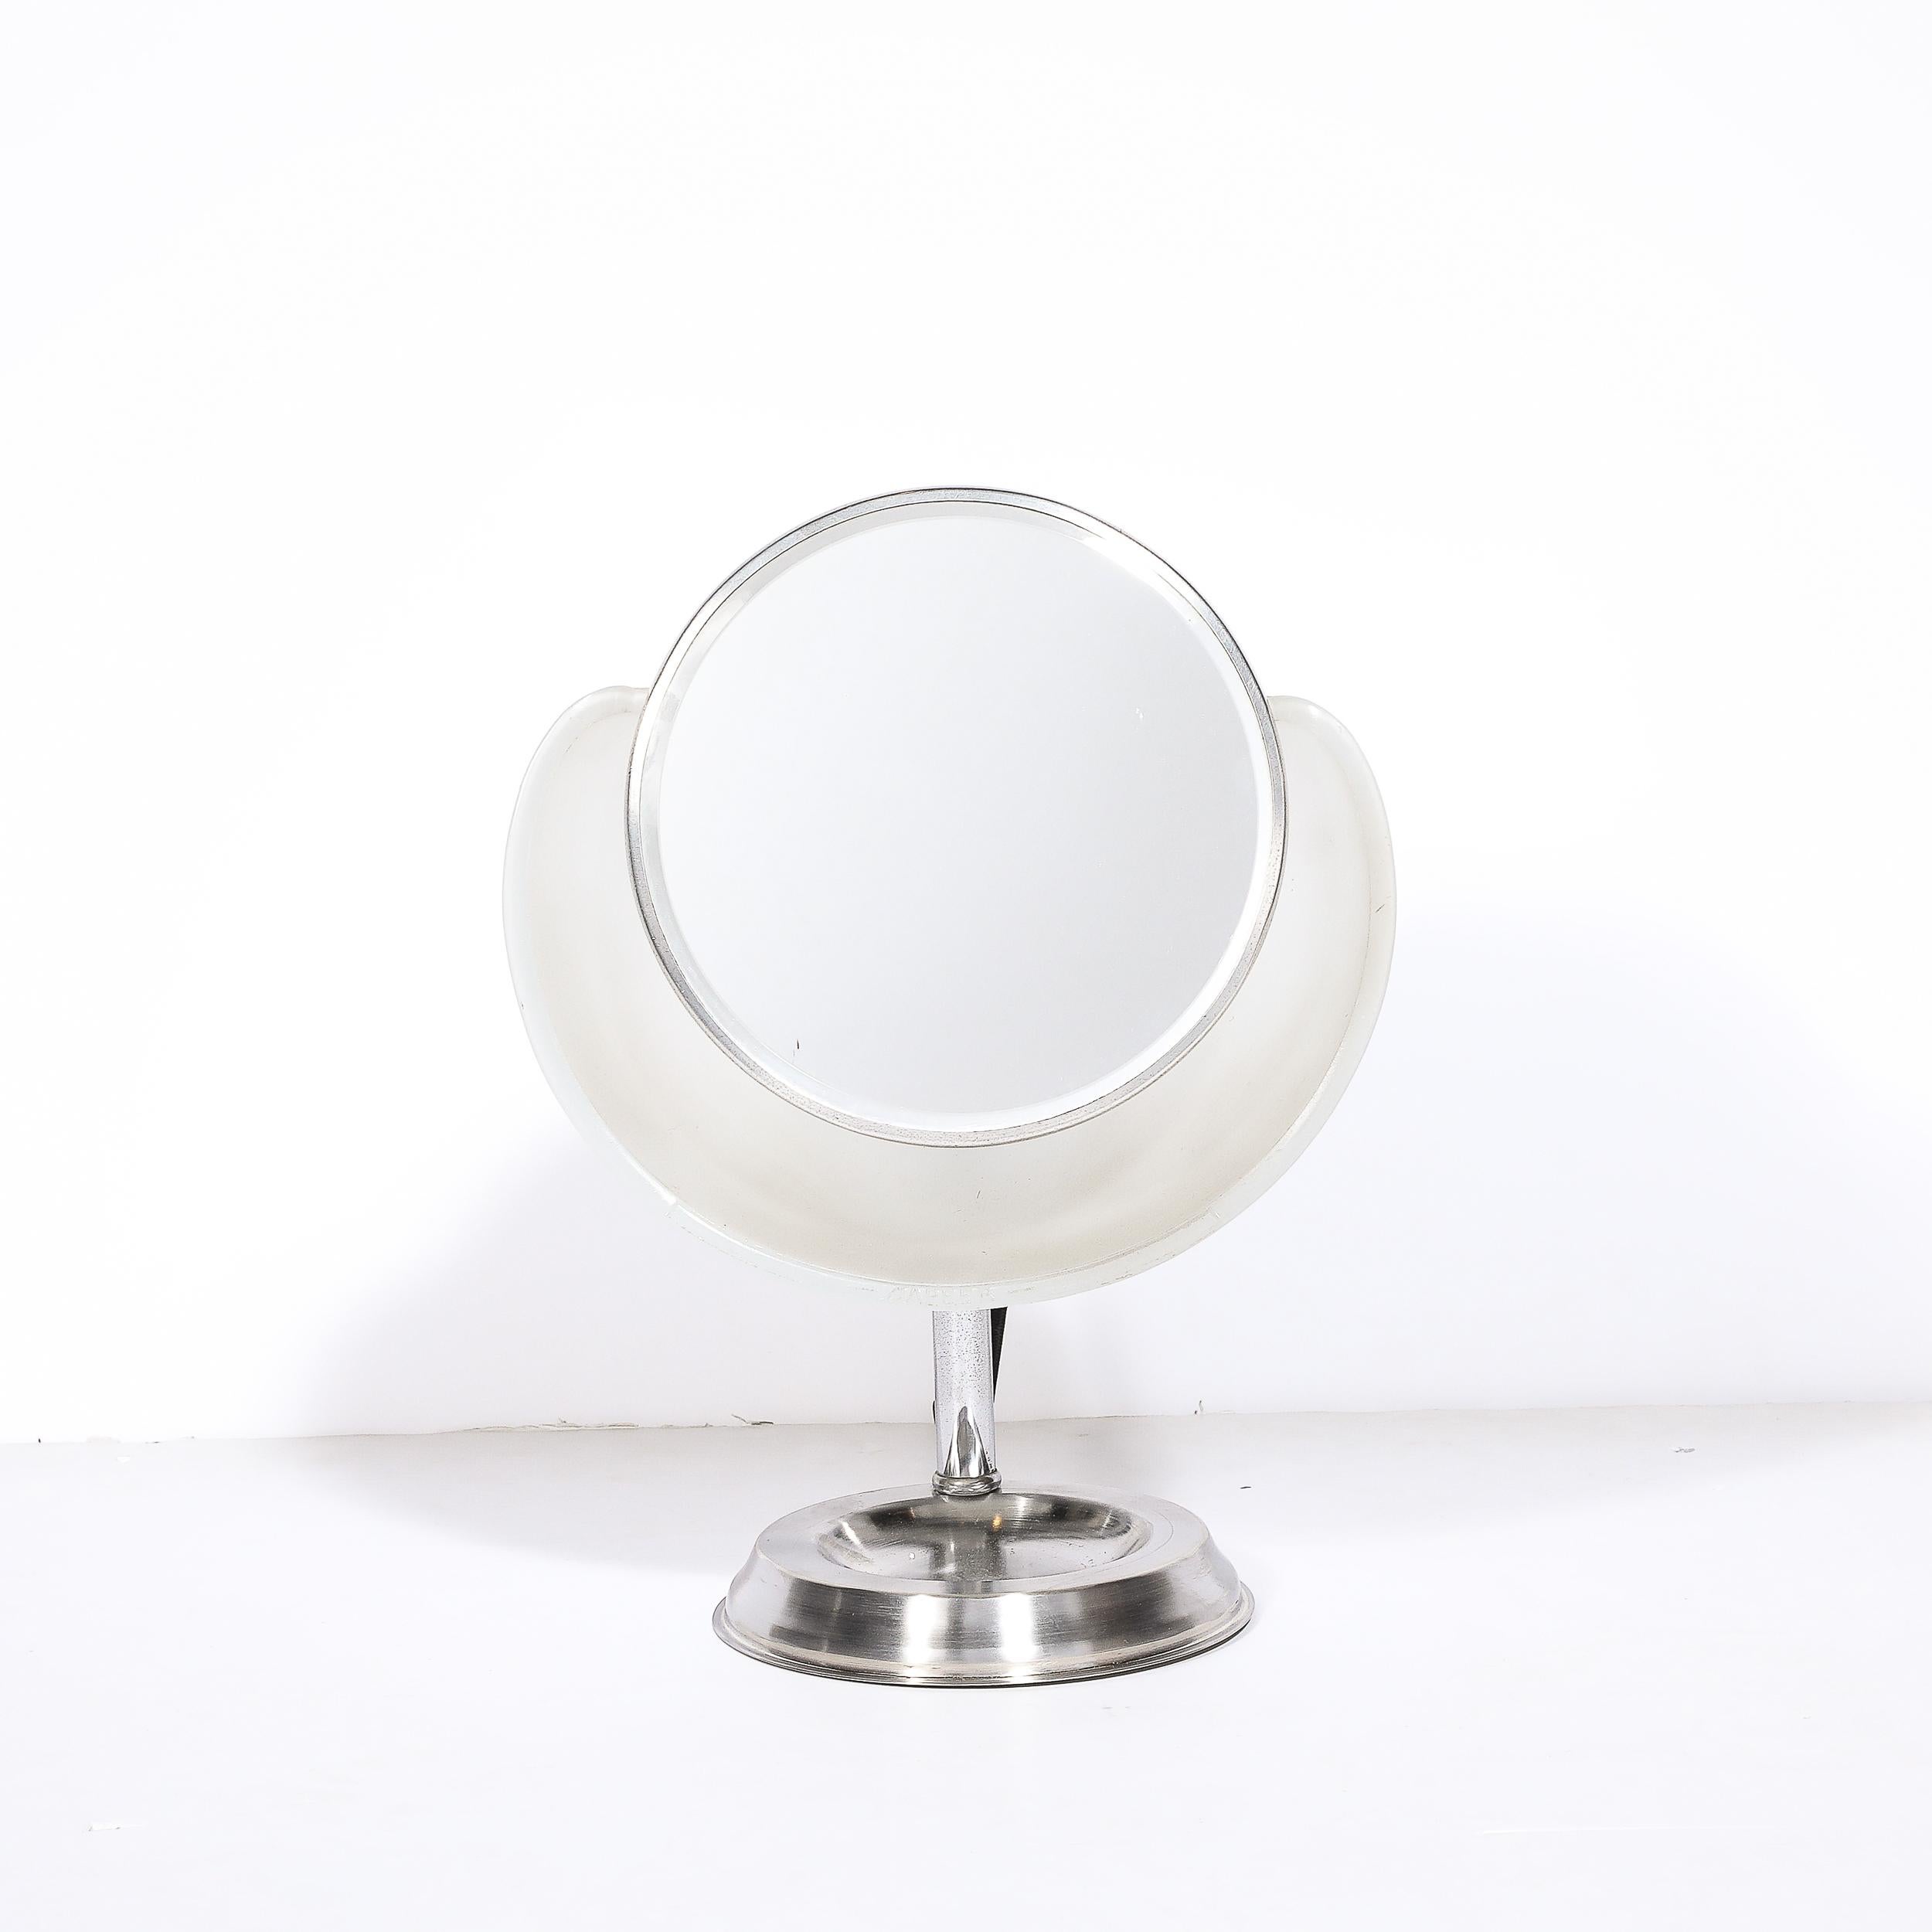 This unique and materially exquisite Art Deco Round Frosted Glass and Chrome Vanity Mirror by Lampeer Lamp Co. was created in the United States in 1928. Previously owned by Joan Crawford, as shown in the last image. It features a round central pane